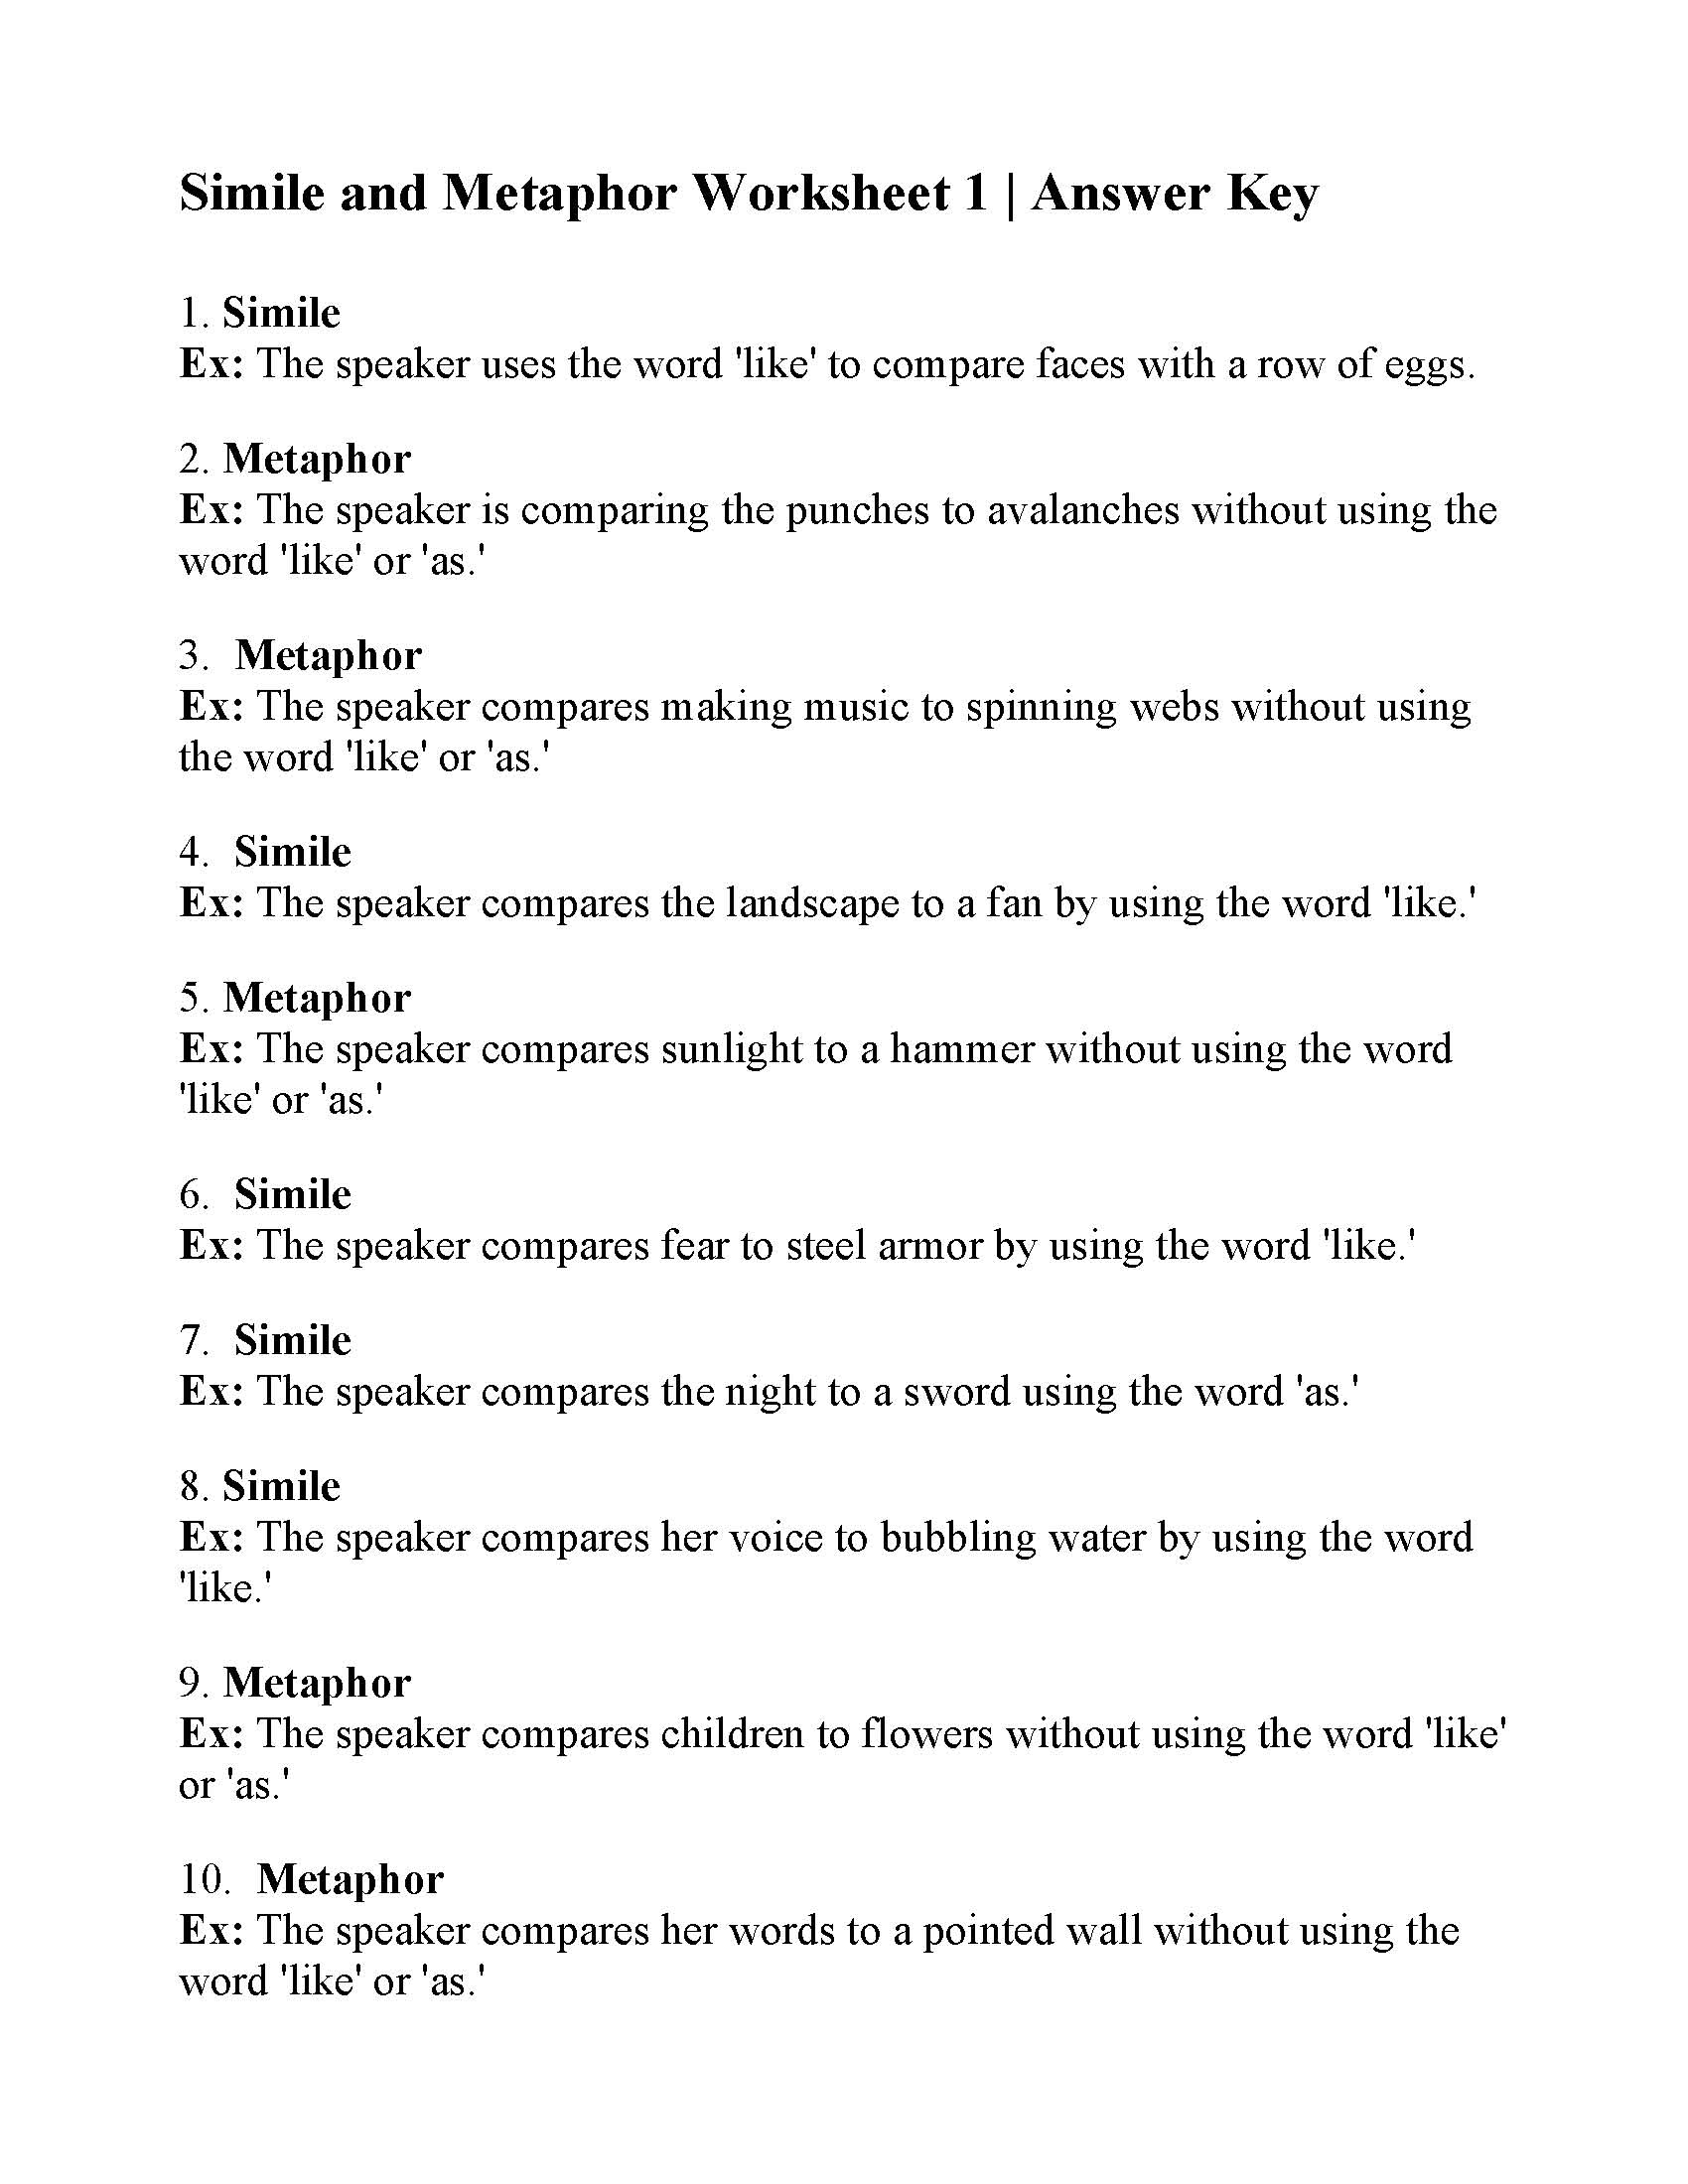 Simile and Metaphor Worksheet 1 Answers